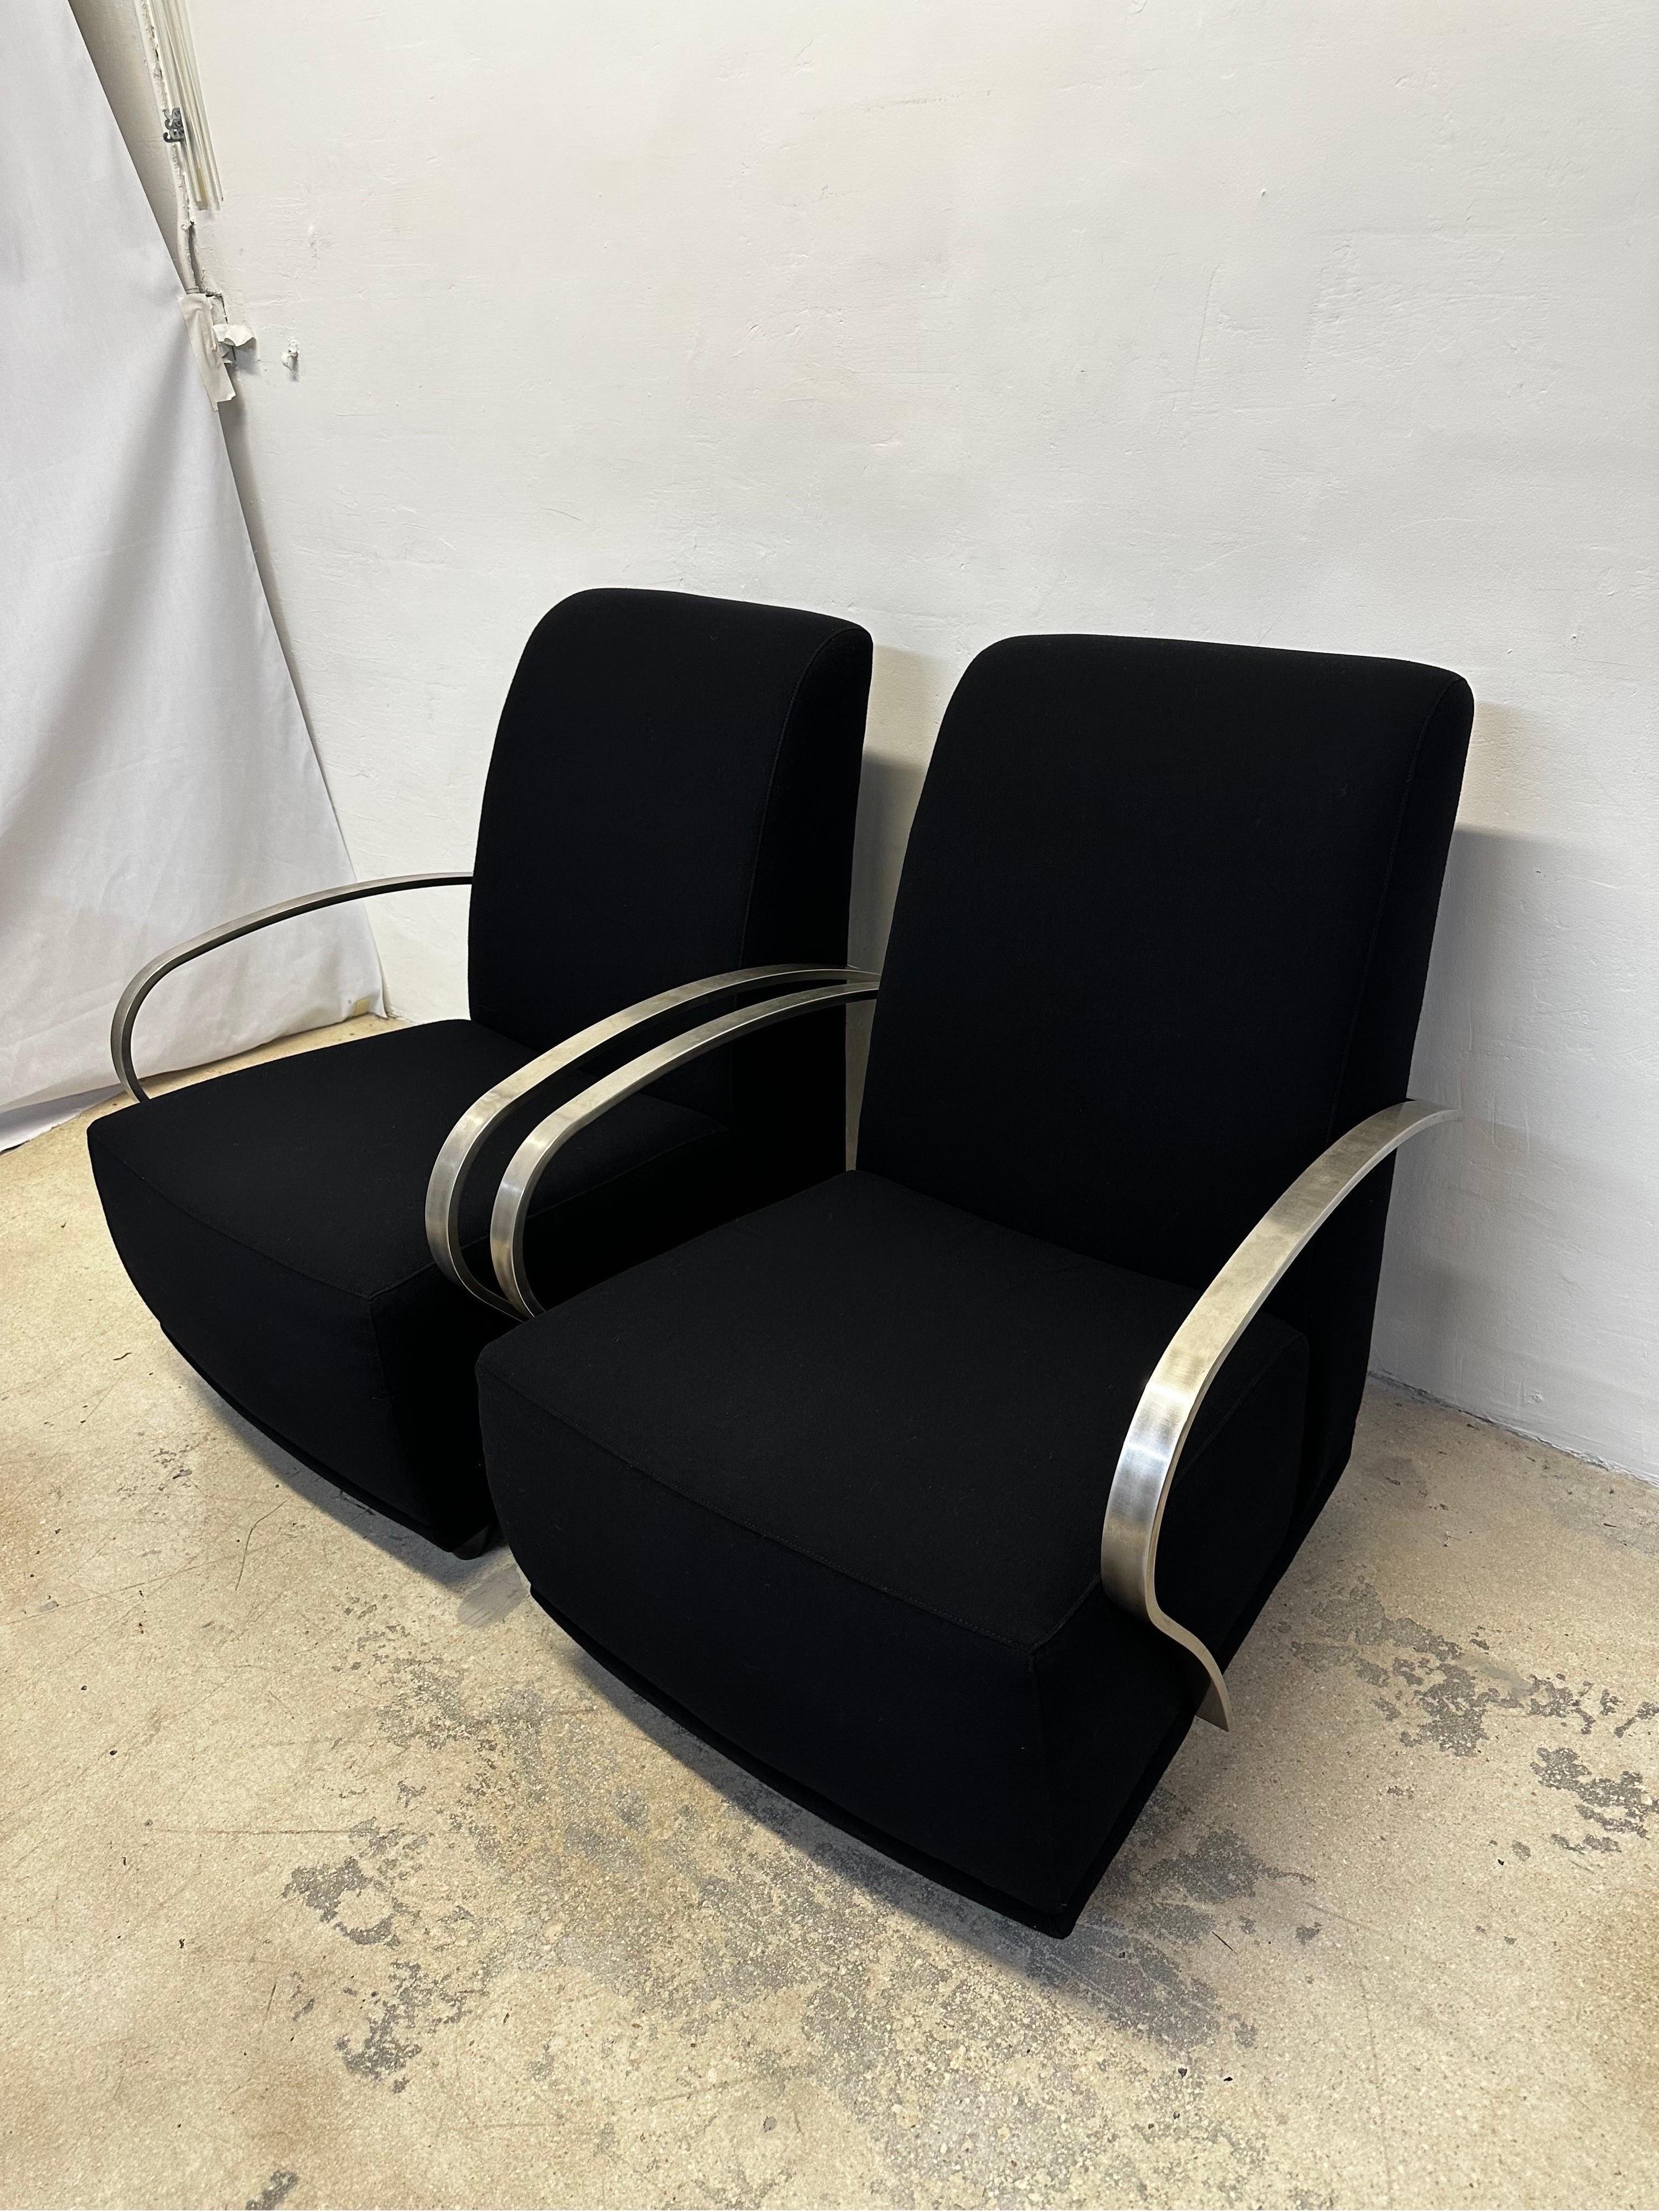 American Art Deco Revival Black Lounge Chairs With Steel Arms by Directional - a Pair For Sale